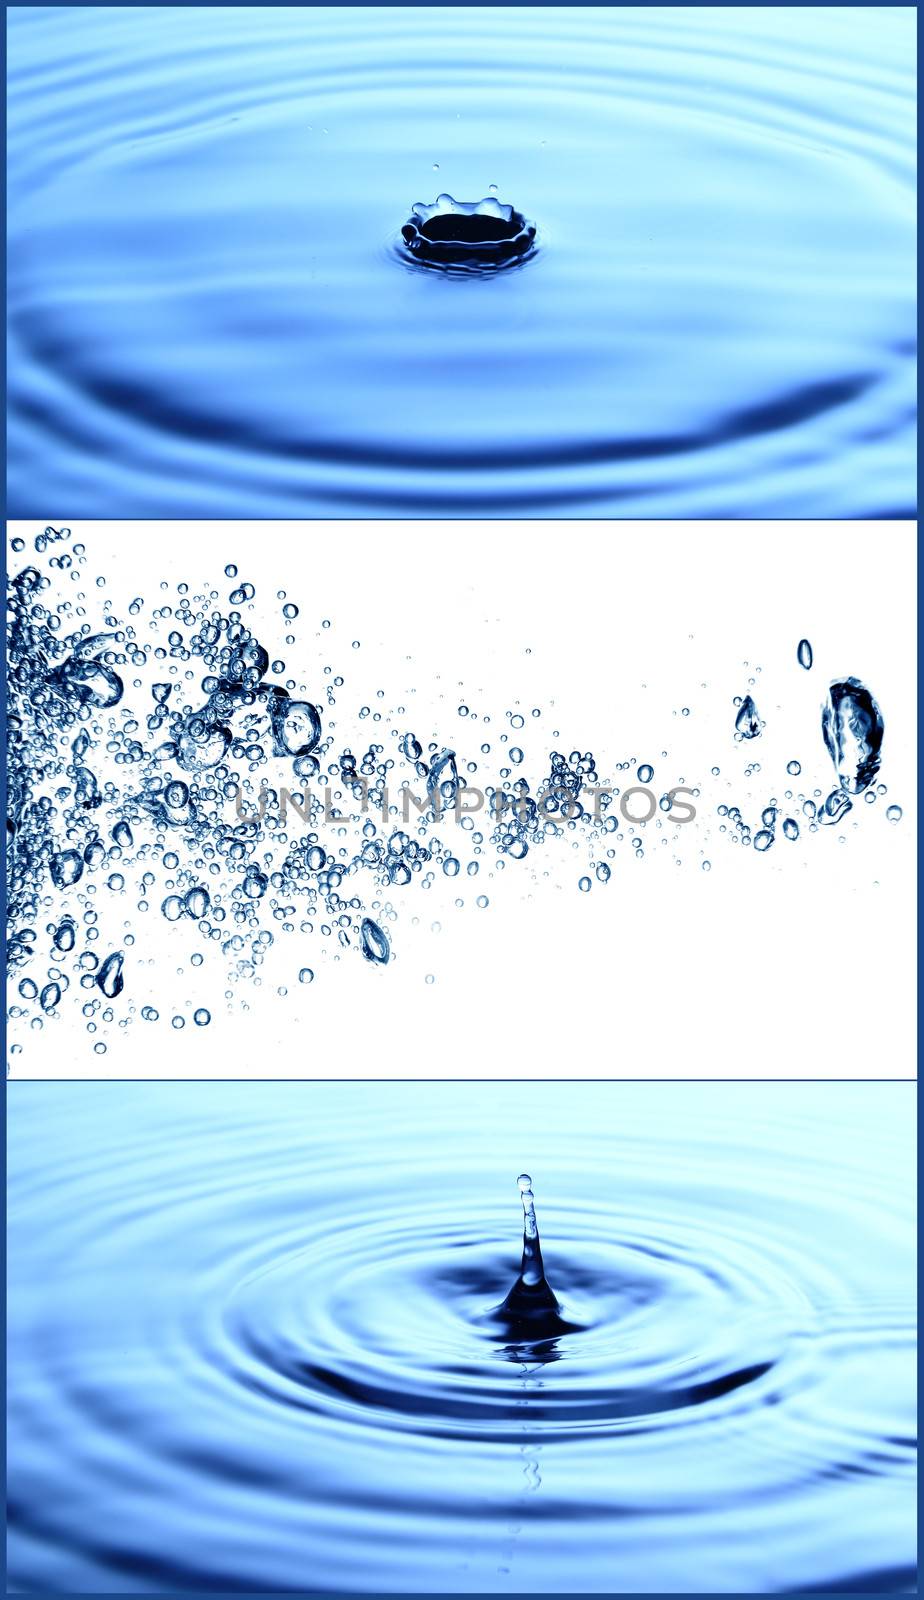 Clean photos of pure water splashes and bubbles